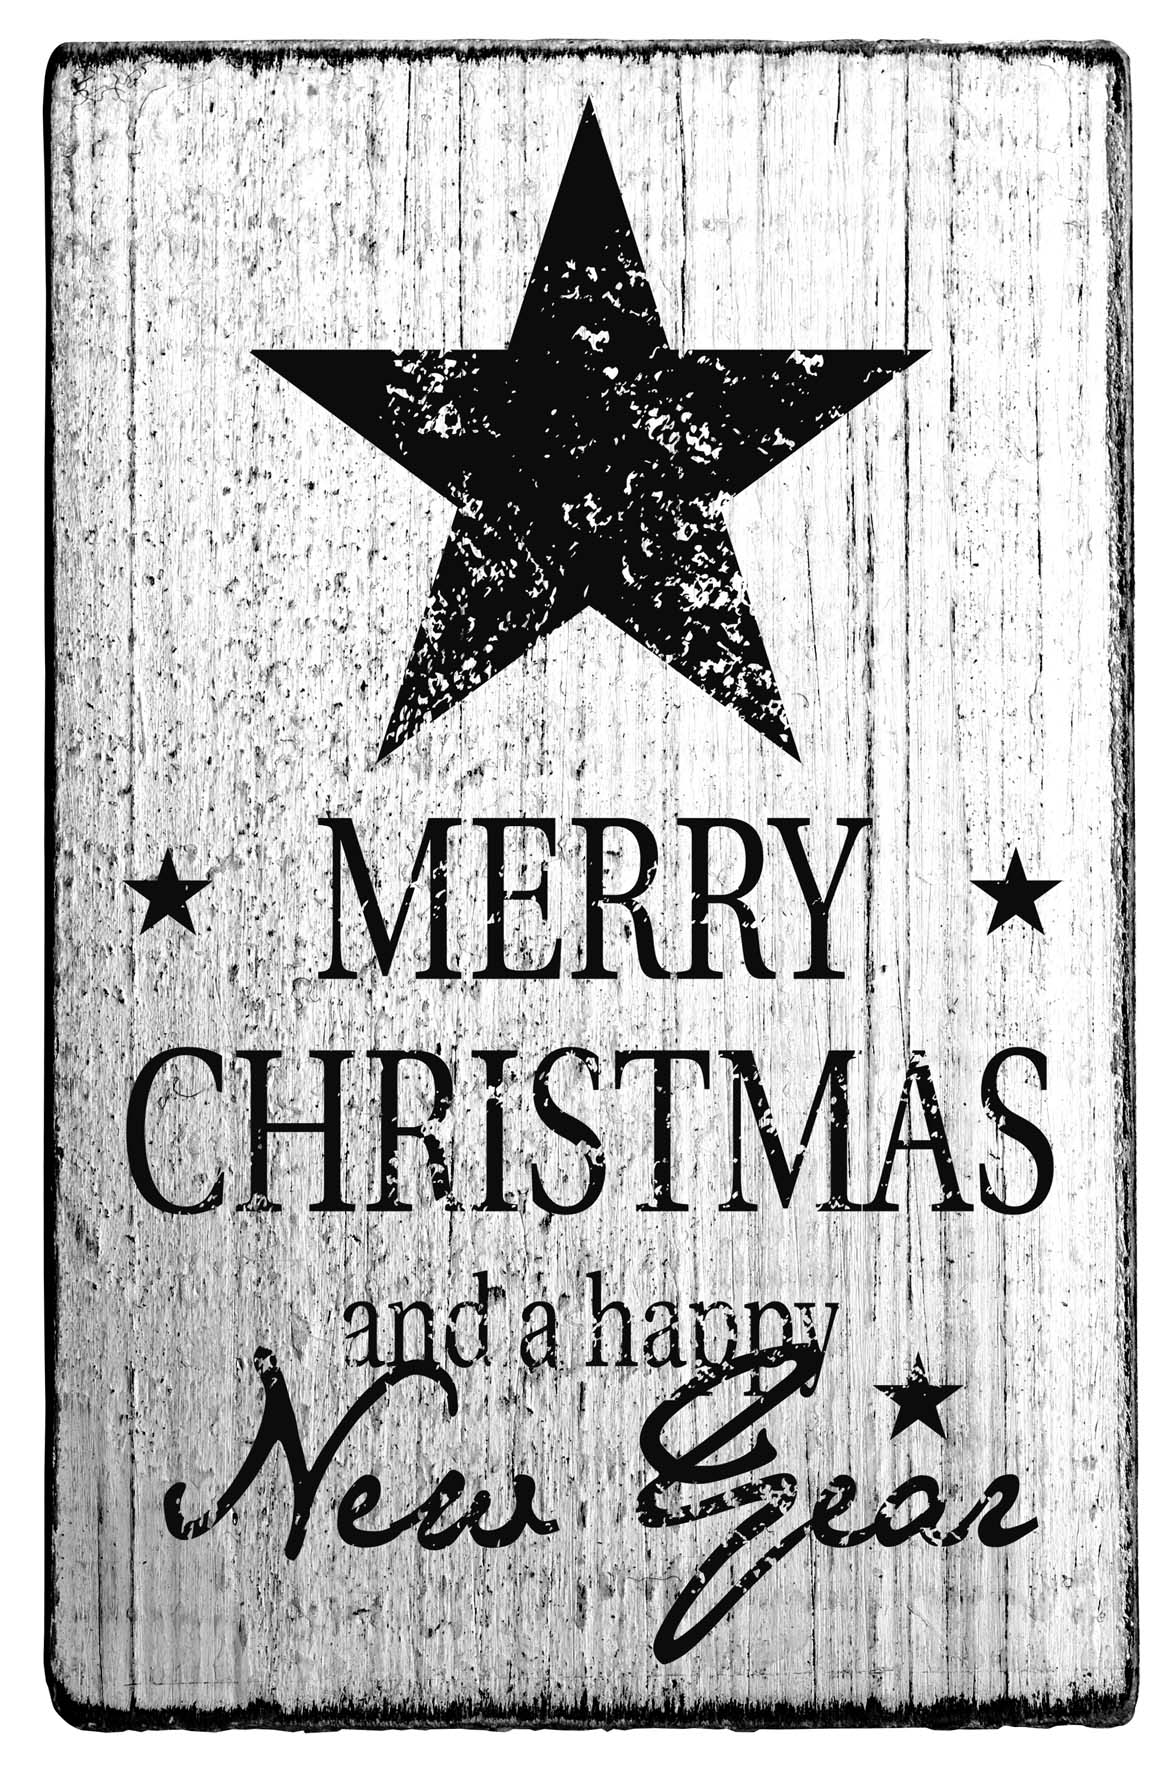 Vintage - Merry Christmas and a happy New Year - V-01057